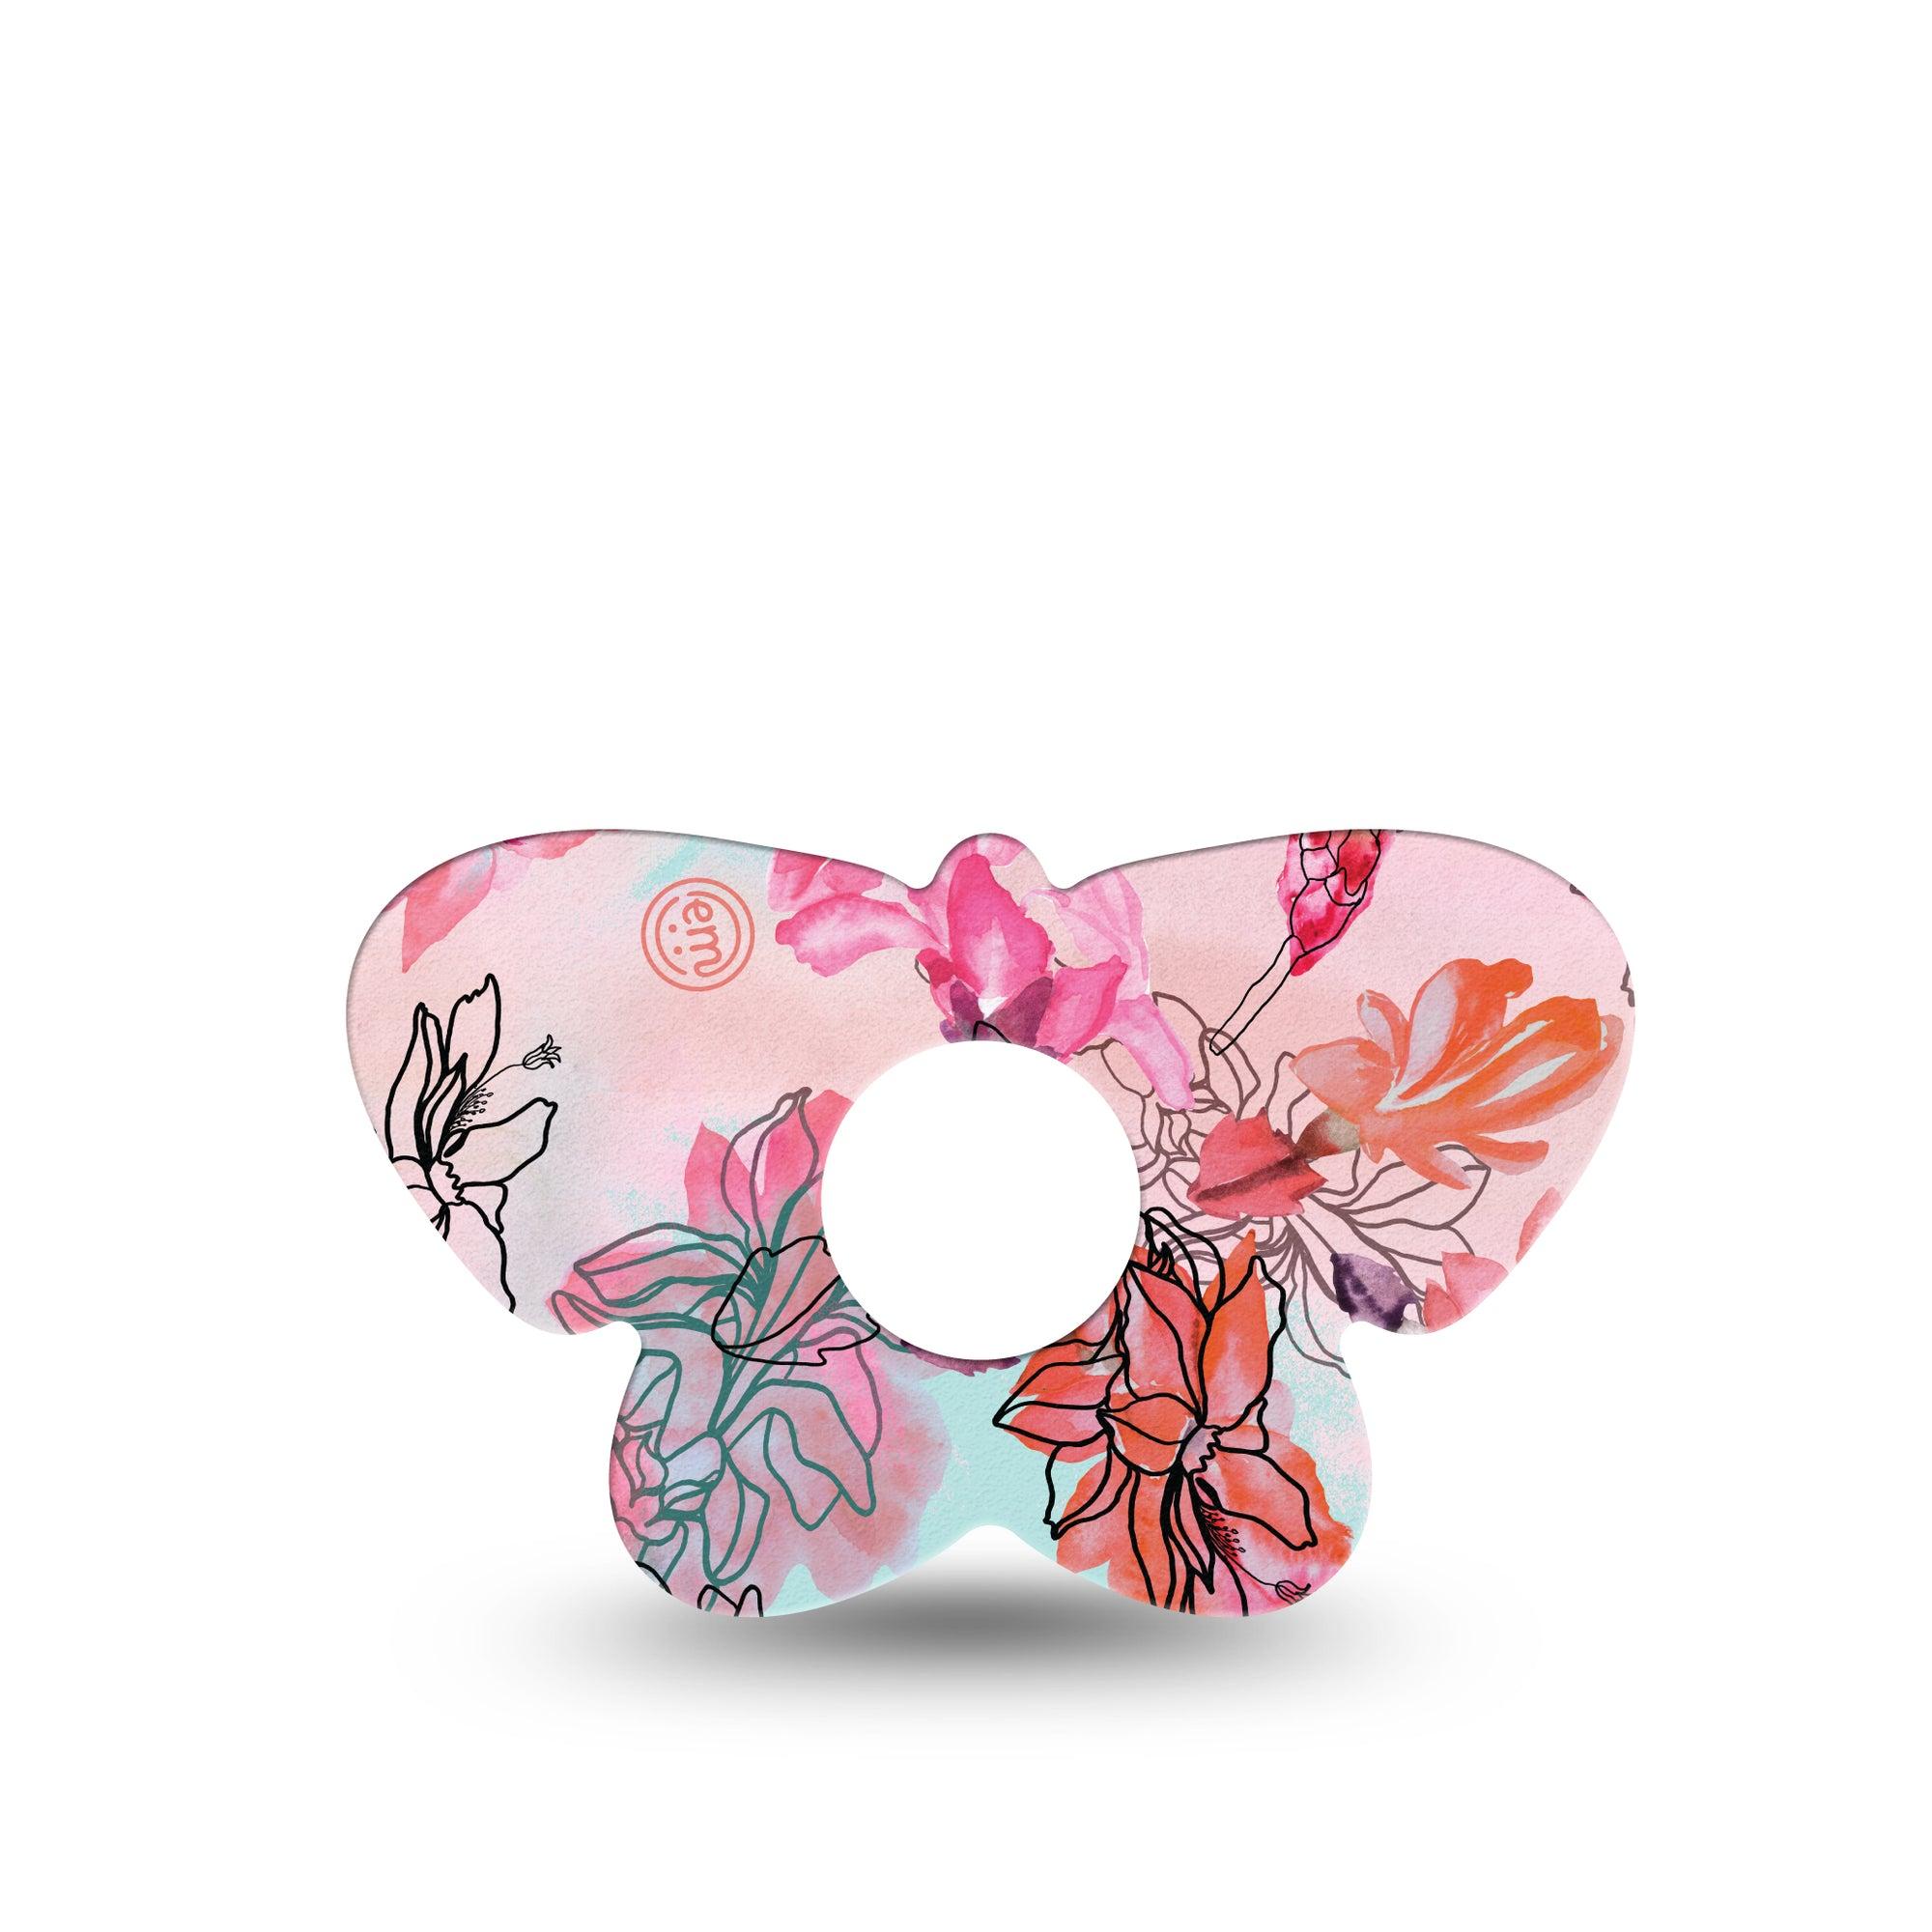 ExpressionMed Whimsical Blossoms Butterfly Libre 3 Tape, Single, Mischievous Floral Themed, CGM Overlay Patch Design